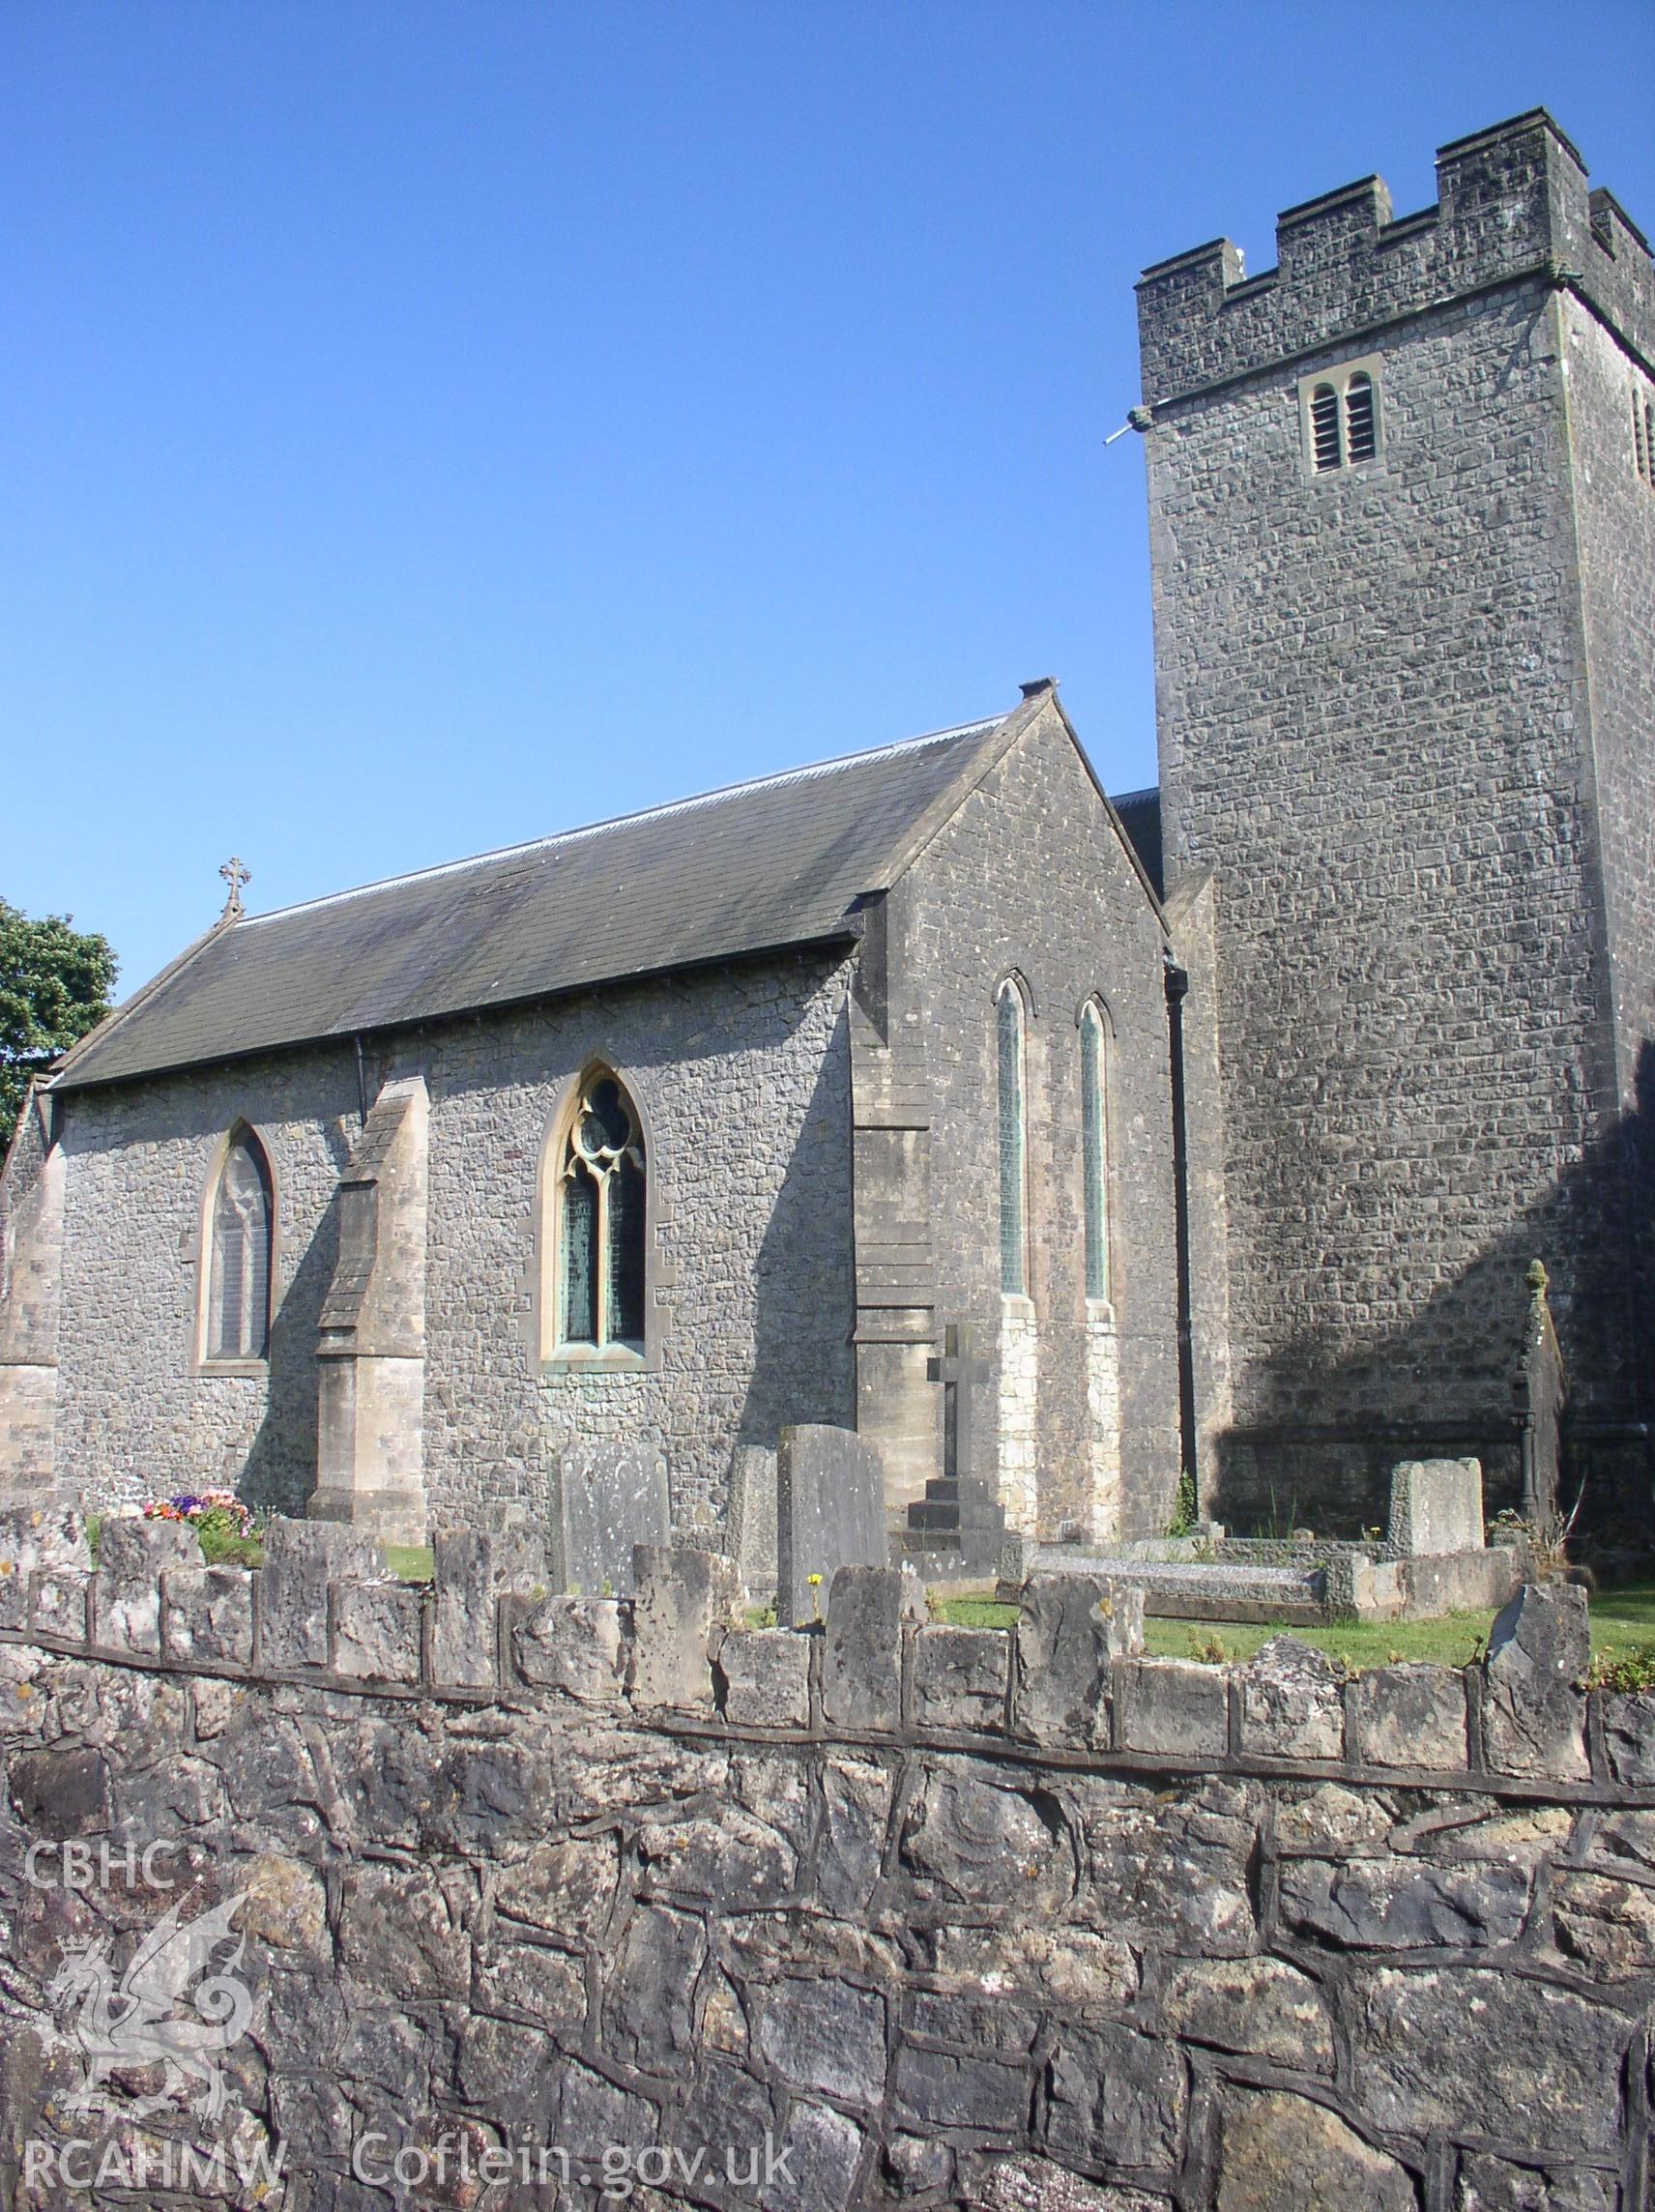 Colour digital photograph showing an elevation view of St Mary's Church, St Fagans; Glamorgan.